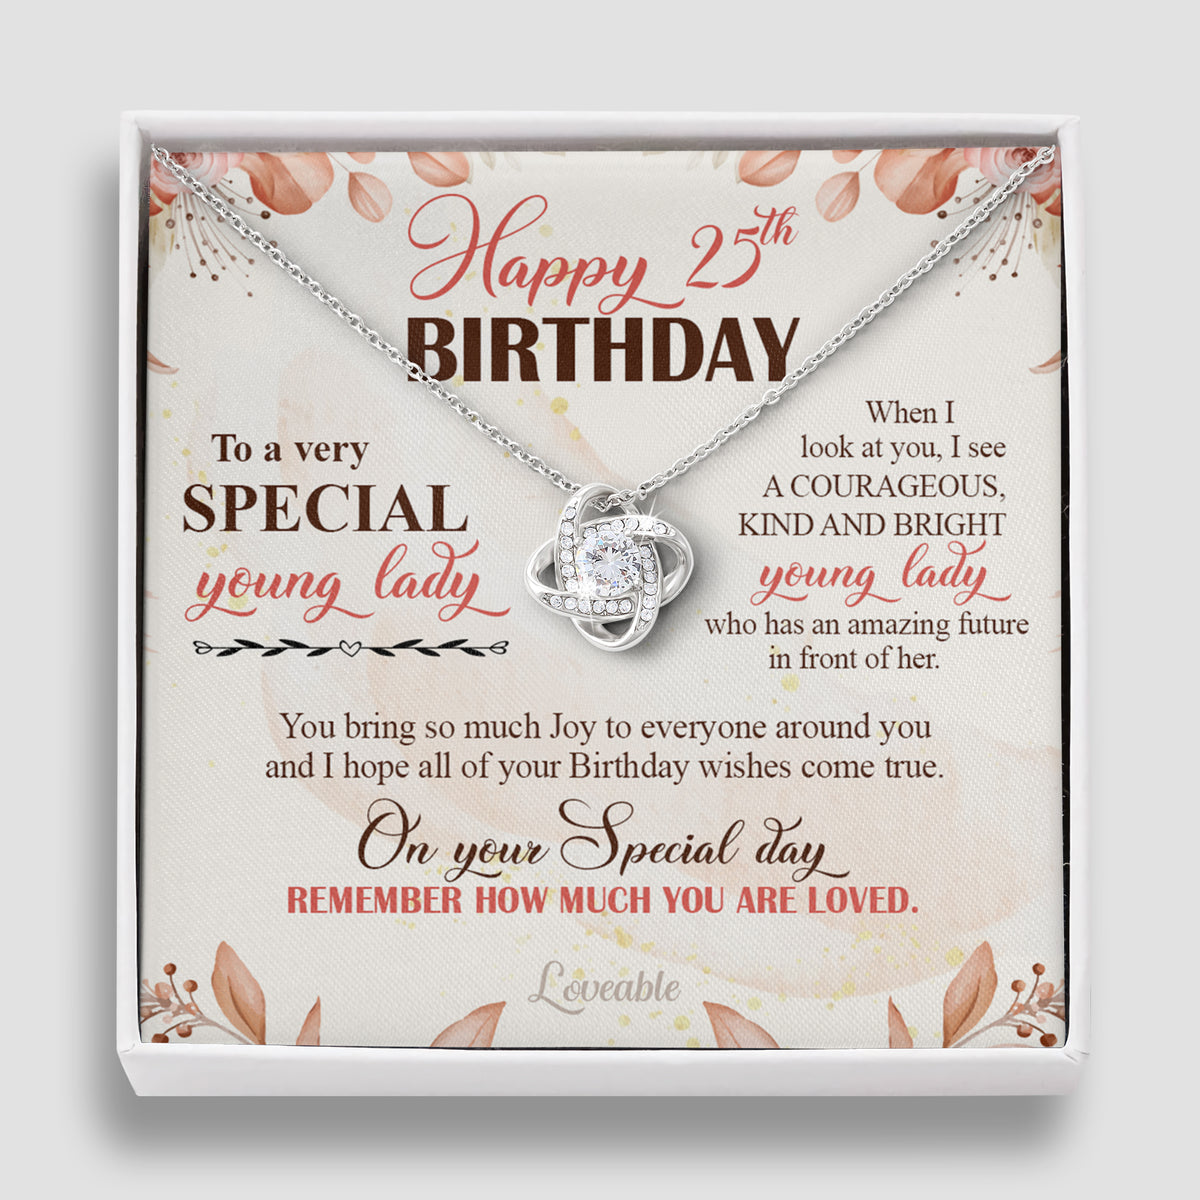 Happy 25th Birthday to a very Special Young Lady - Personalized Necklace - 25th Birthday Gifts for Her